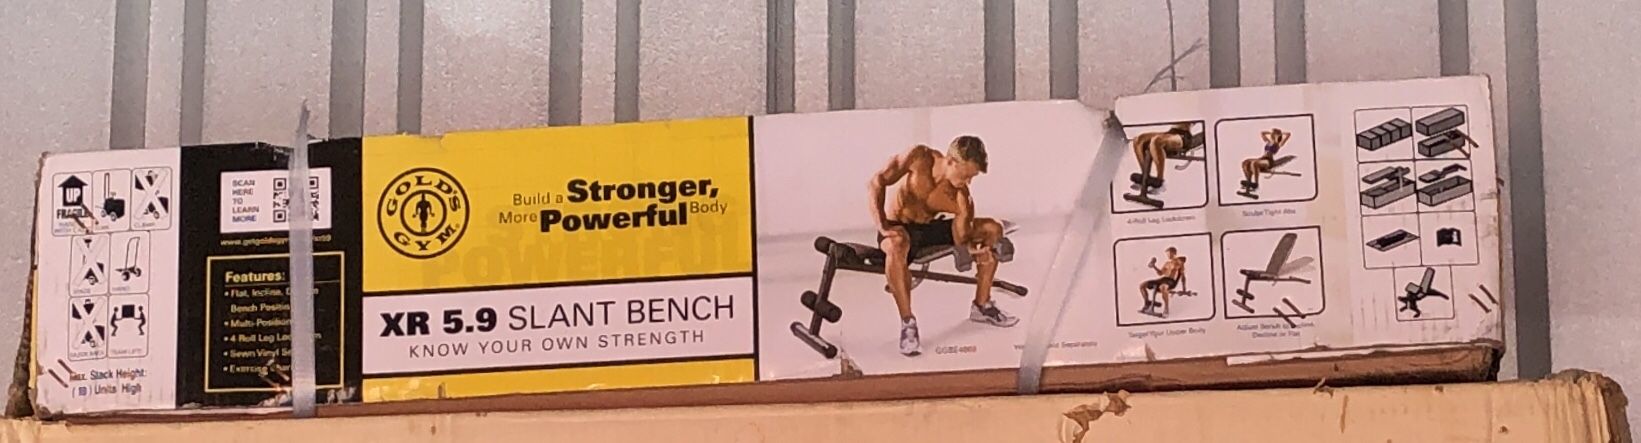 Slant work out bench